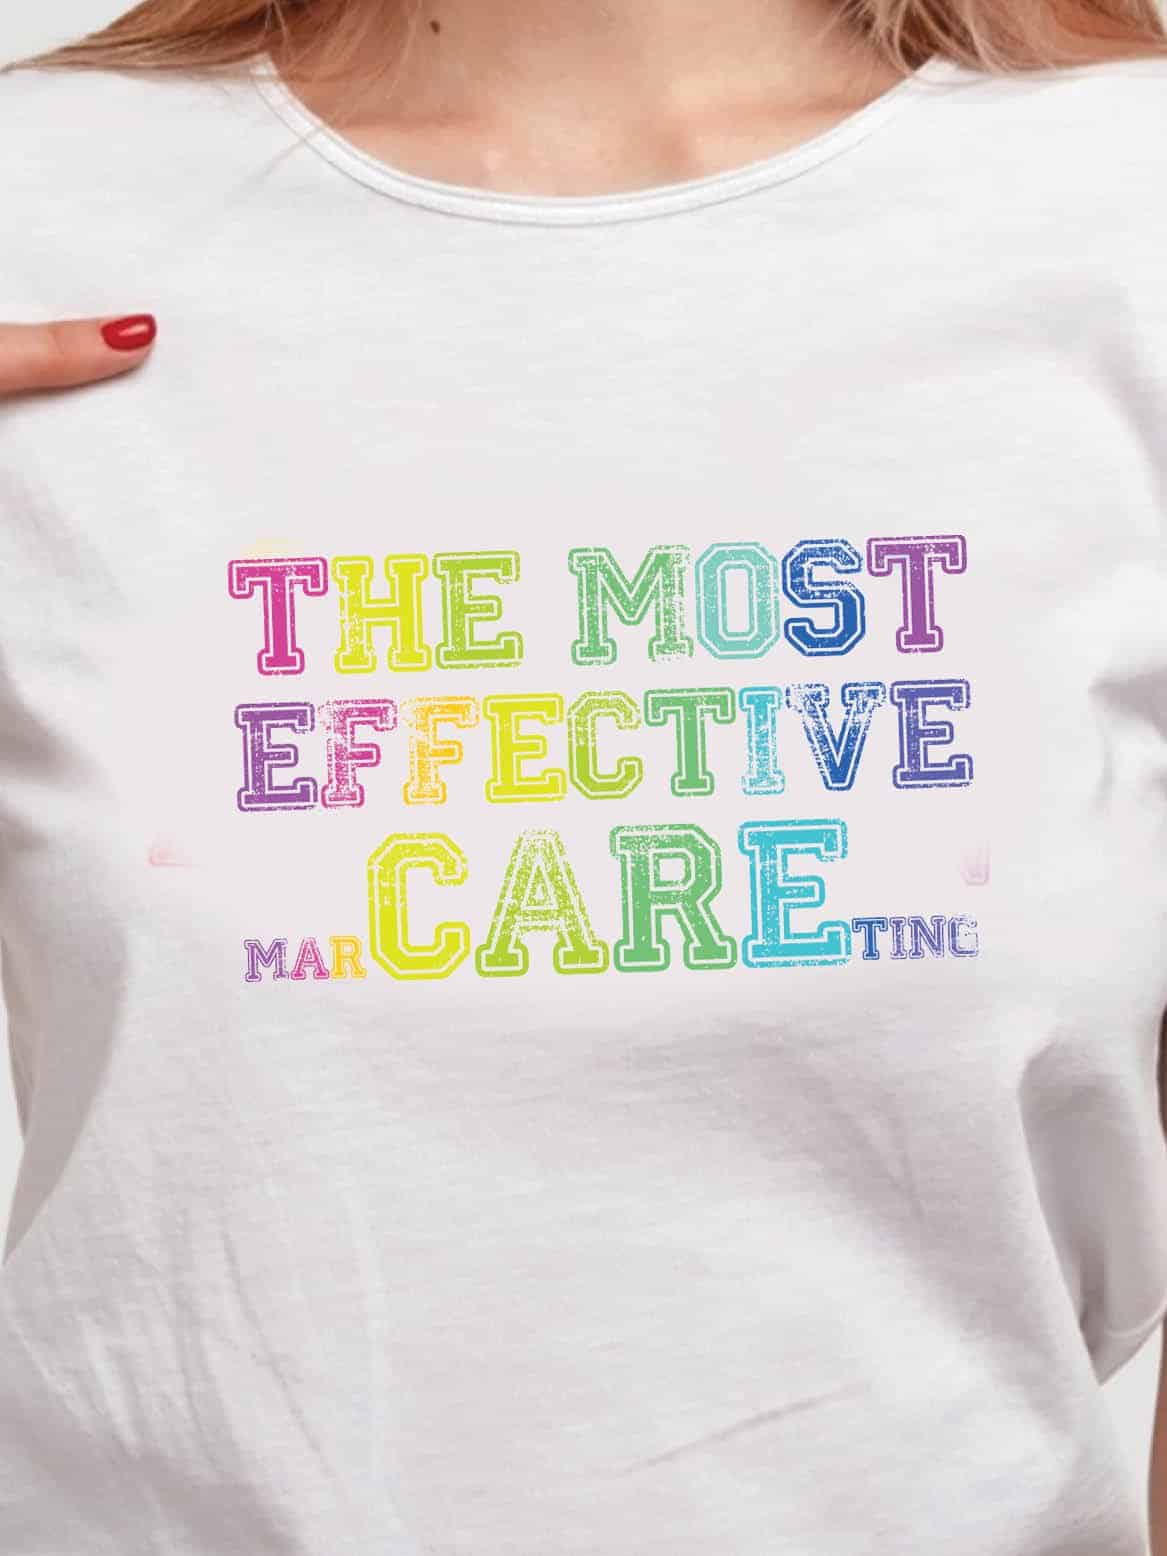 The most effective marketing? Care.